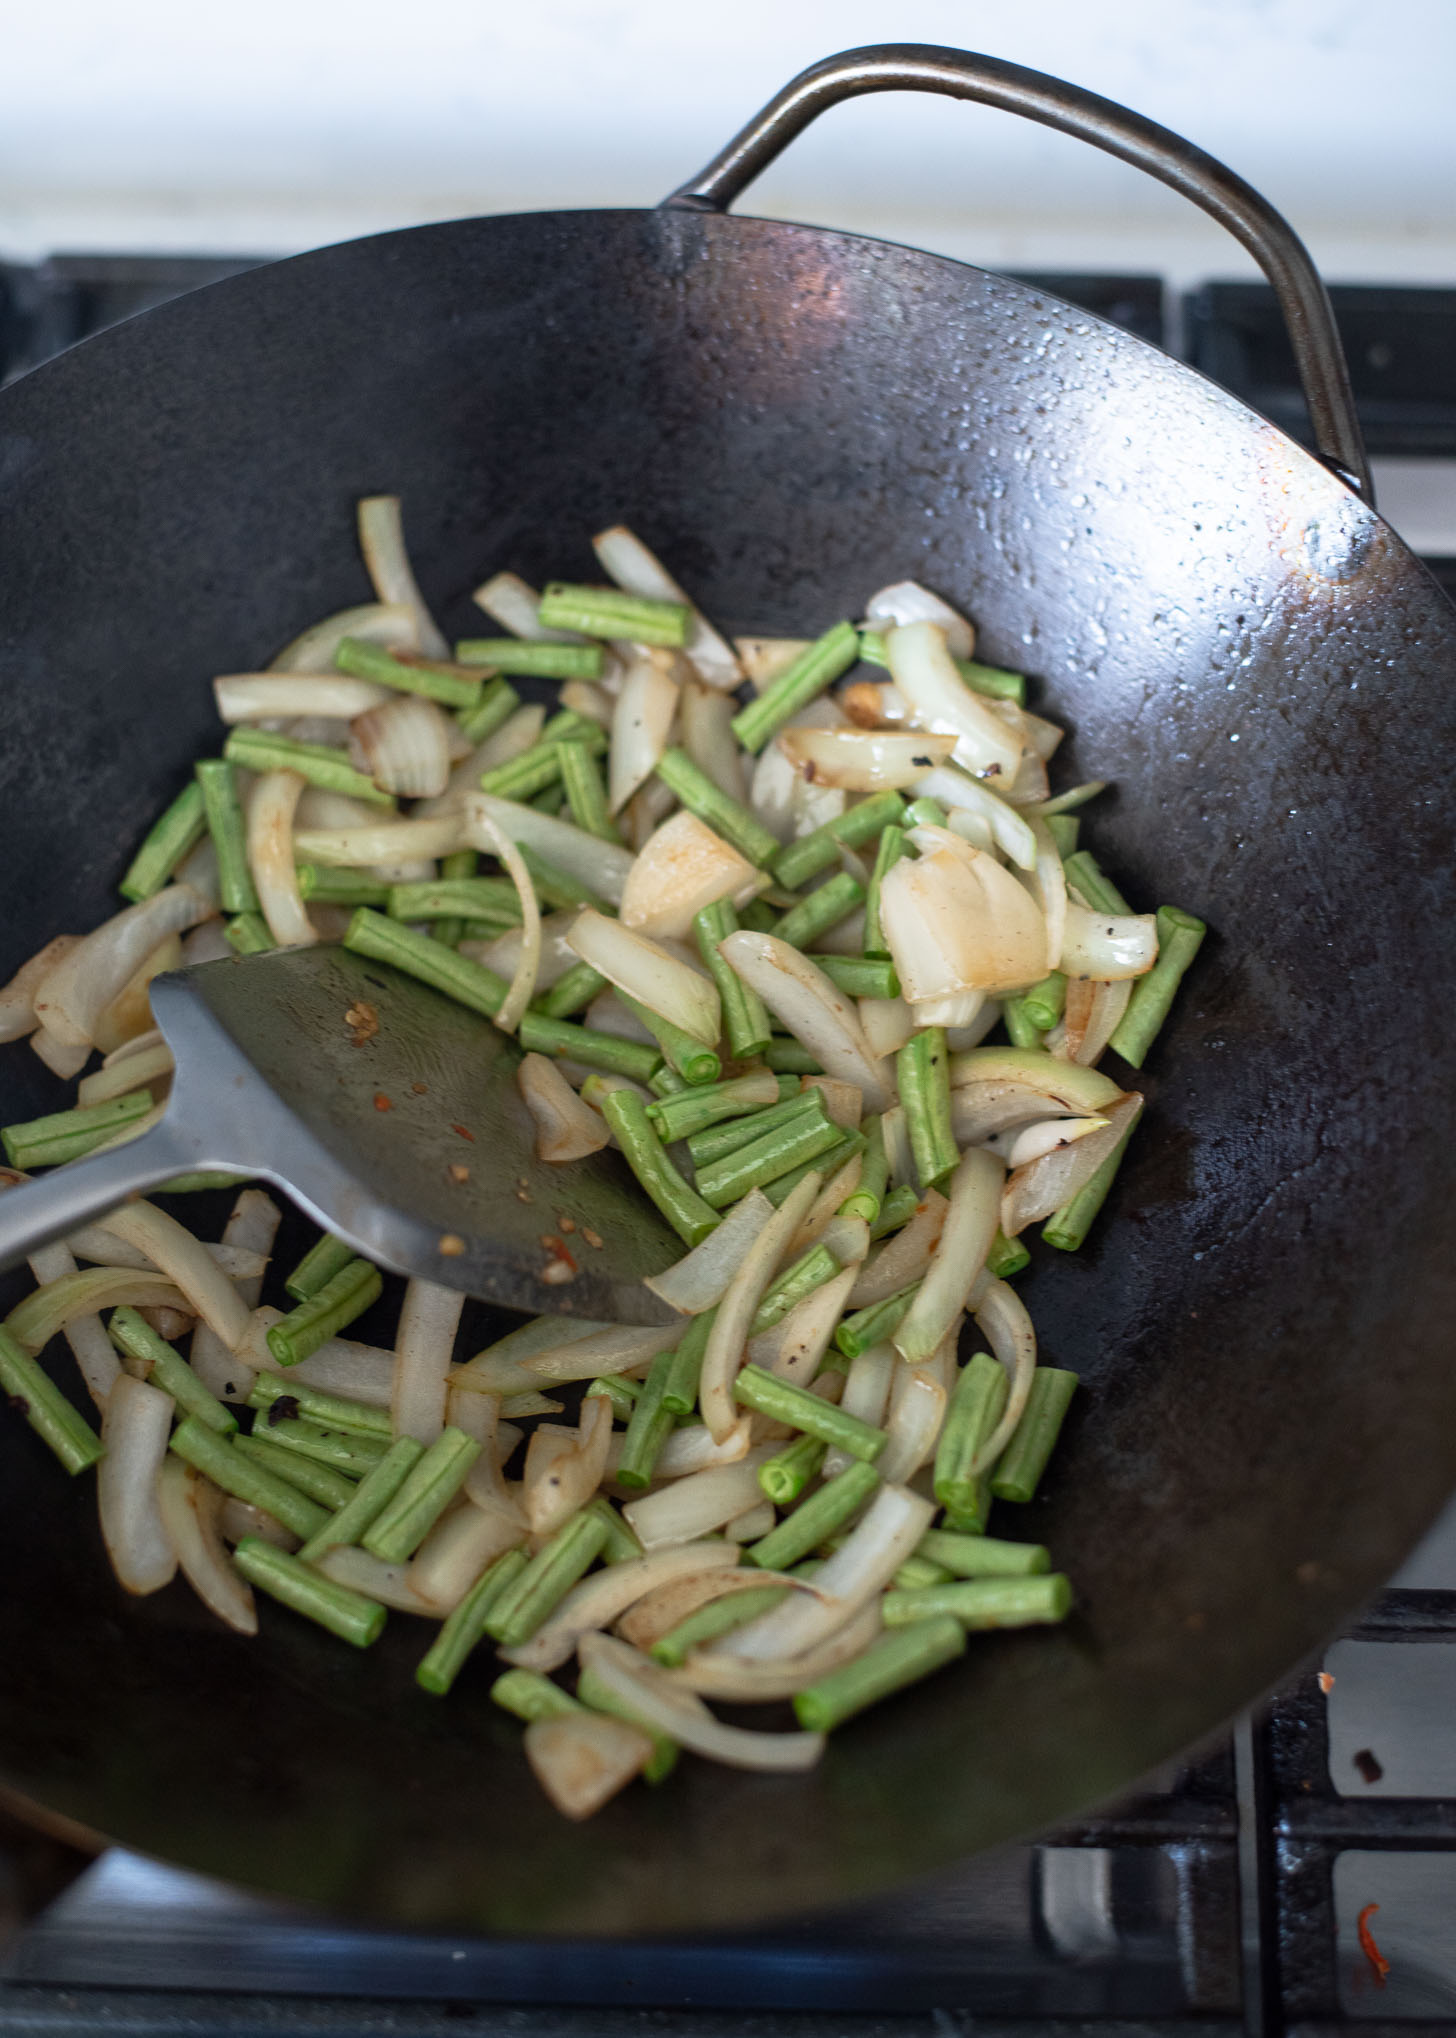 Onion and long bean slices are stir frying in a wok to make Thai basil beef.